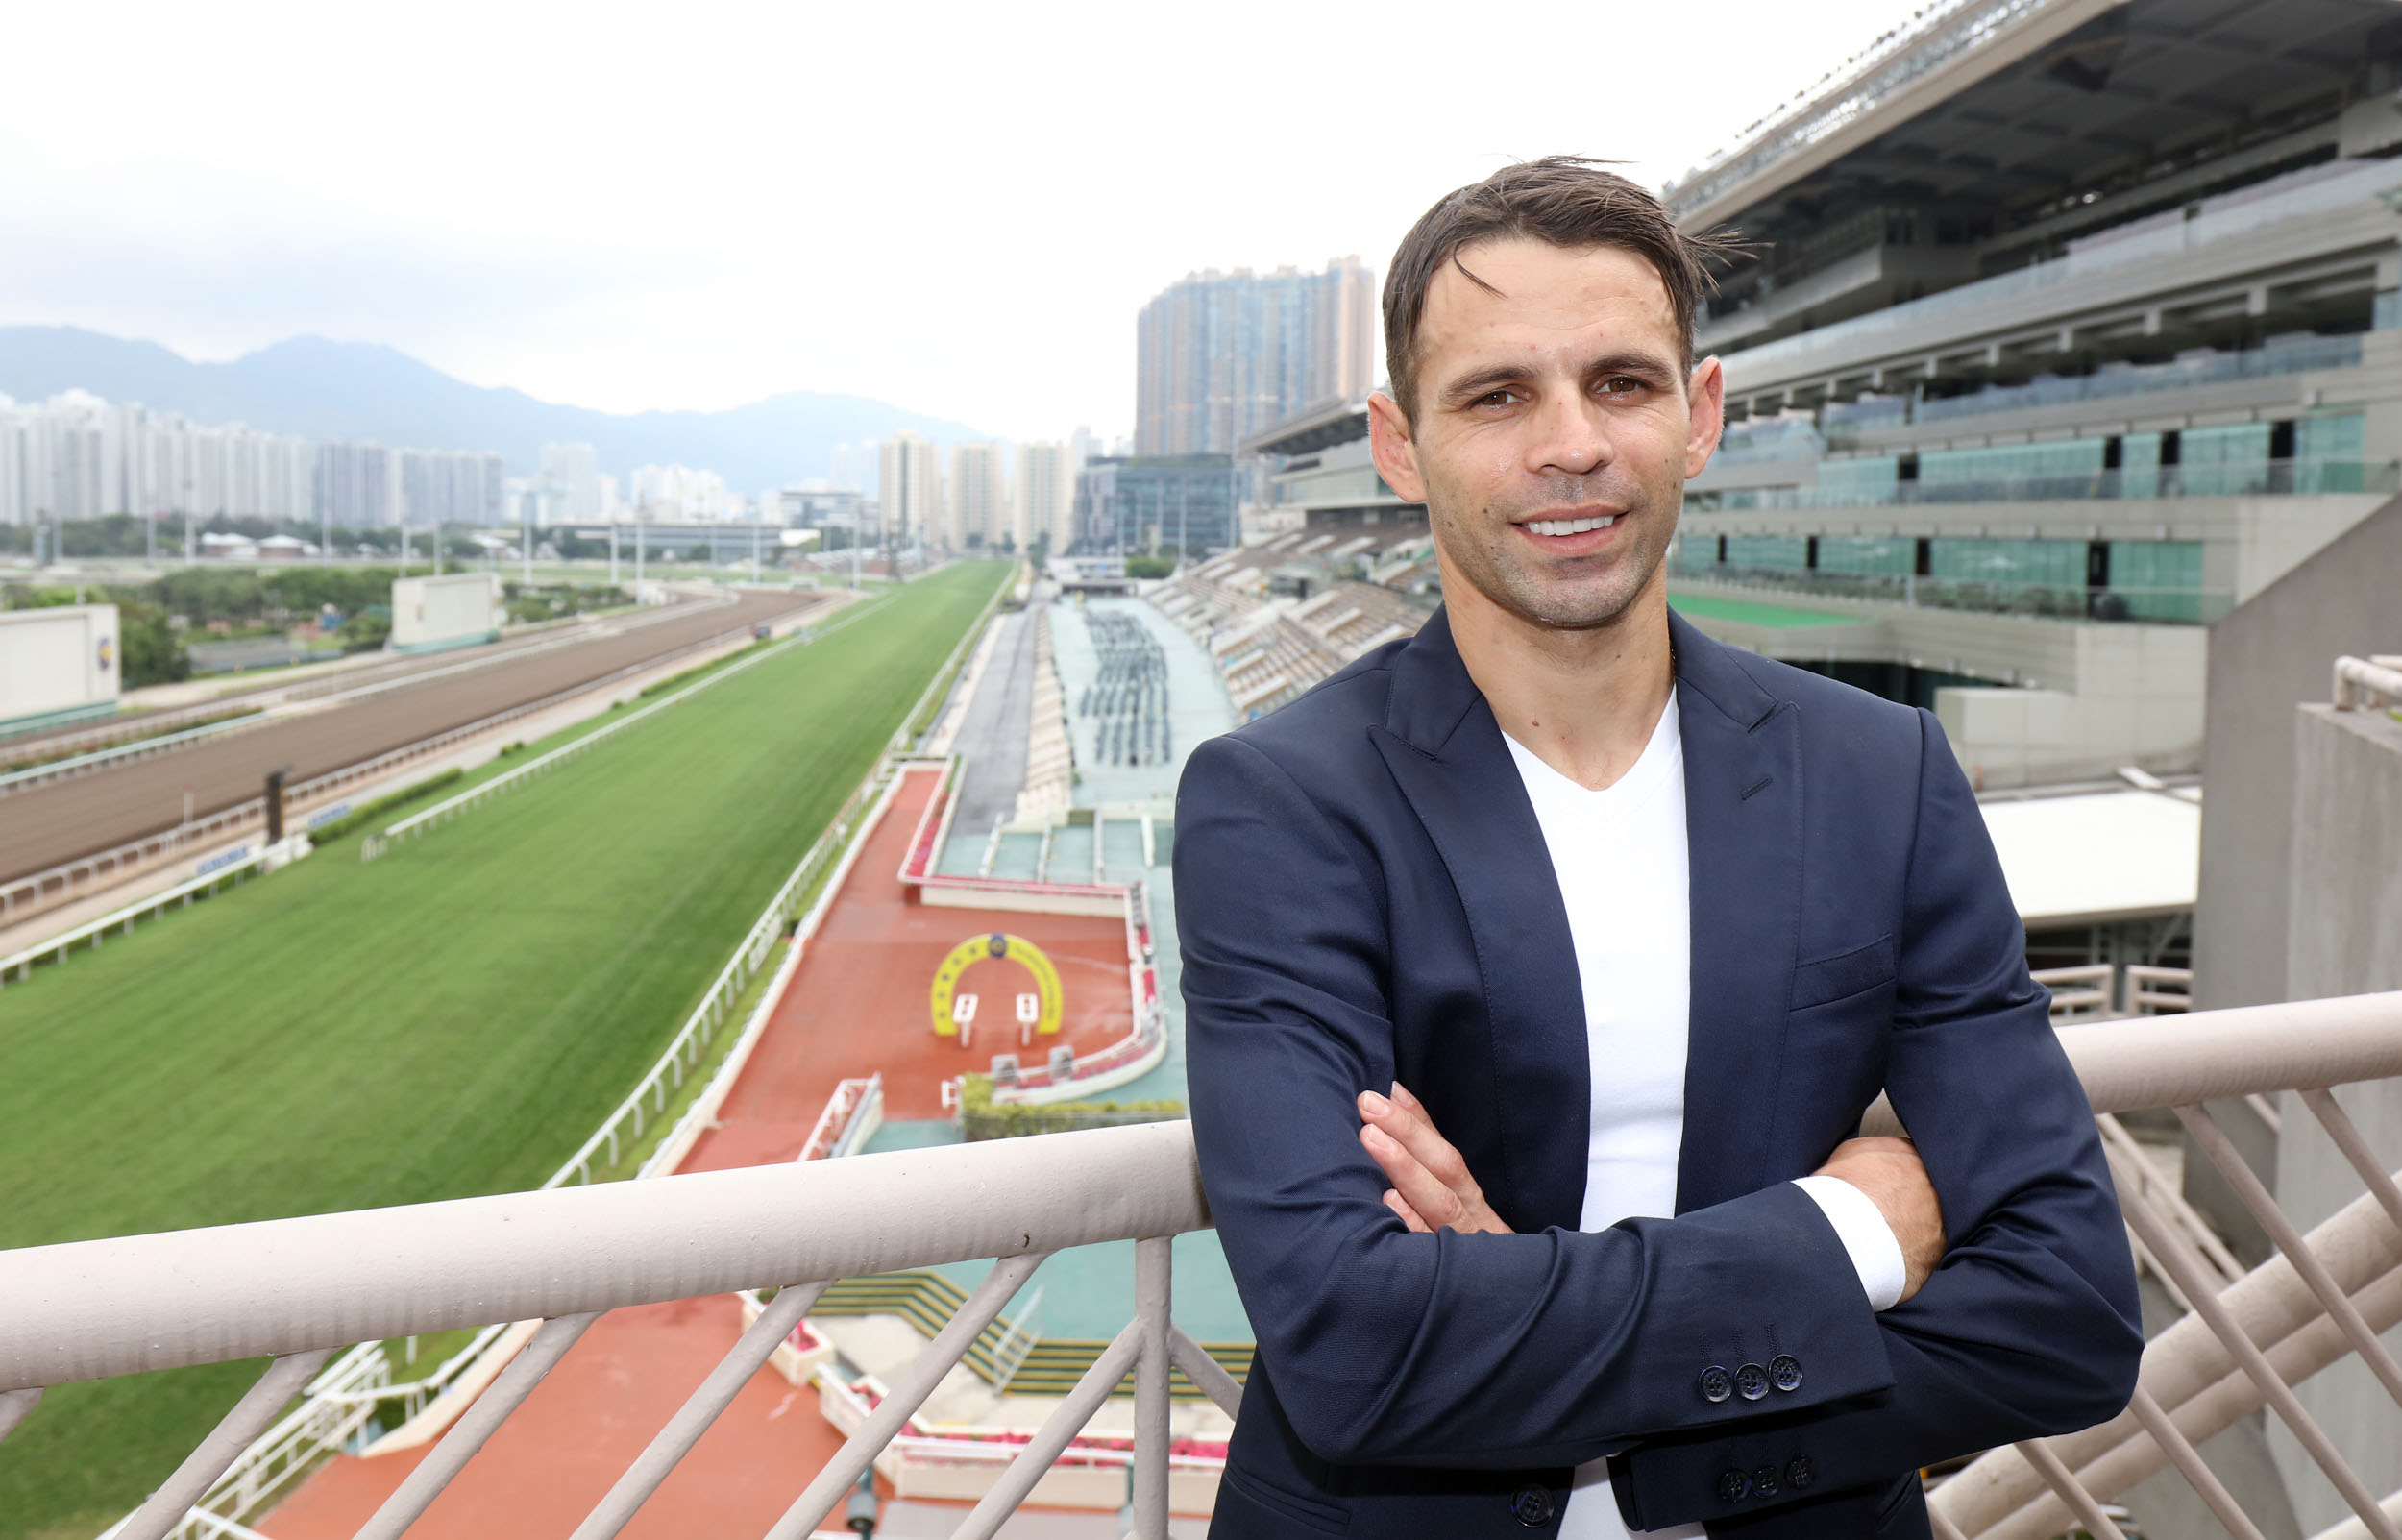 Aldo Domeyer is licensed to ride in Hong Kong till the end of the season.